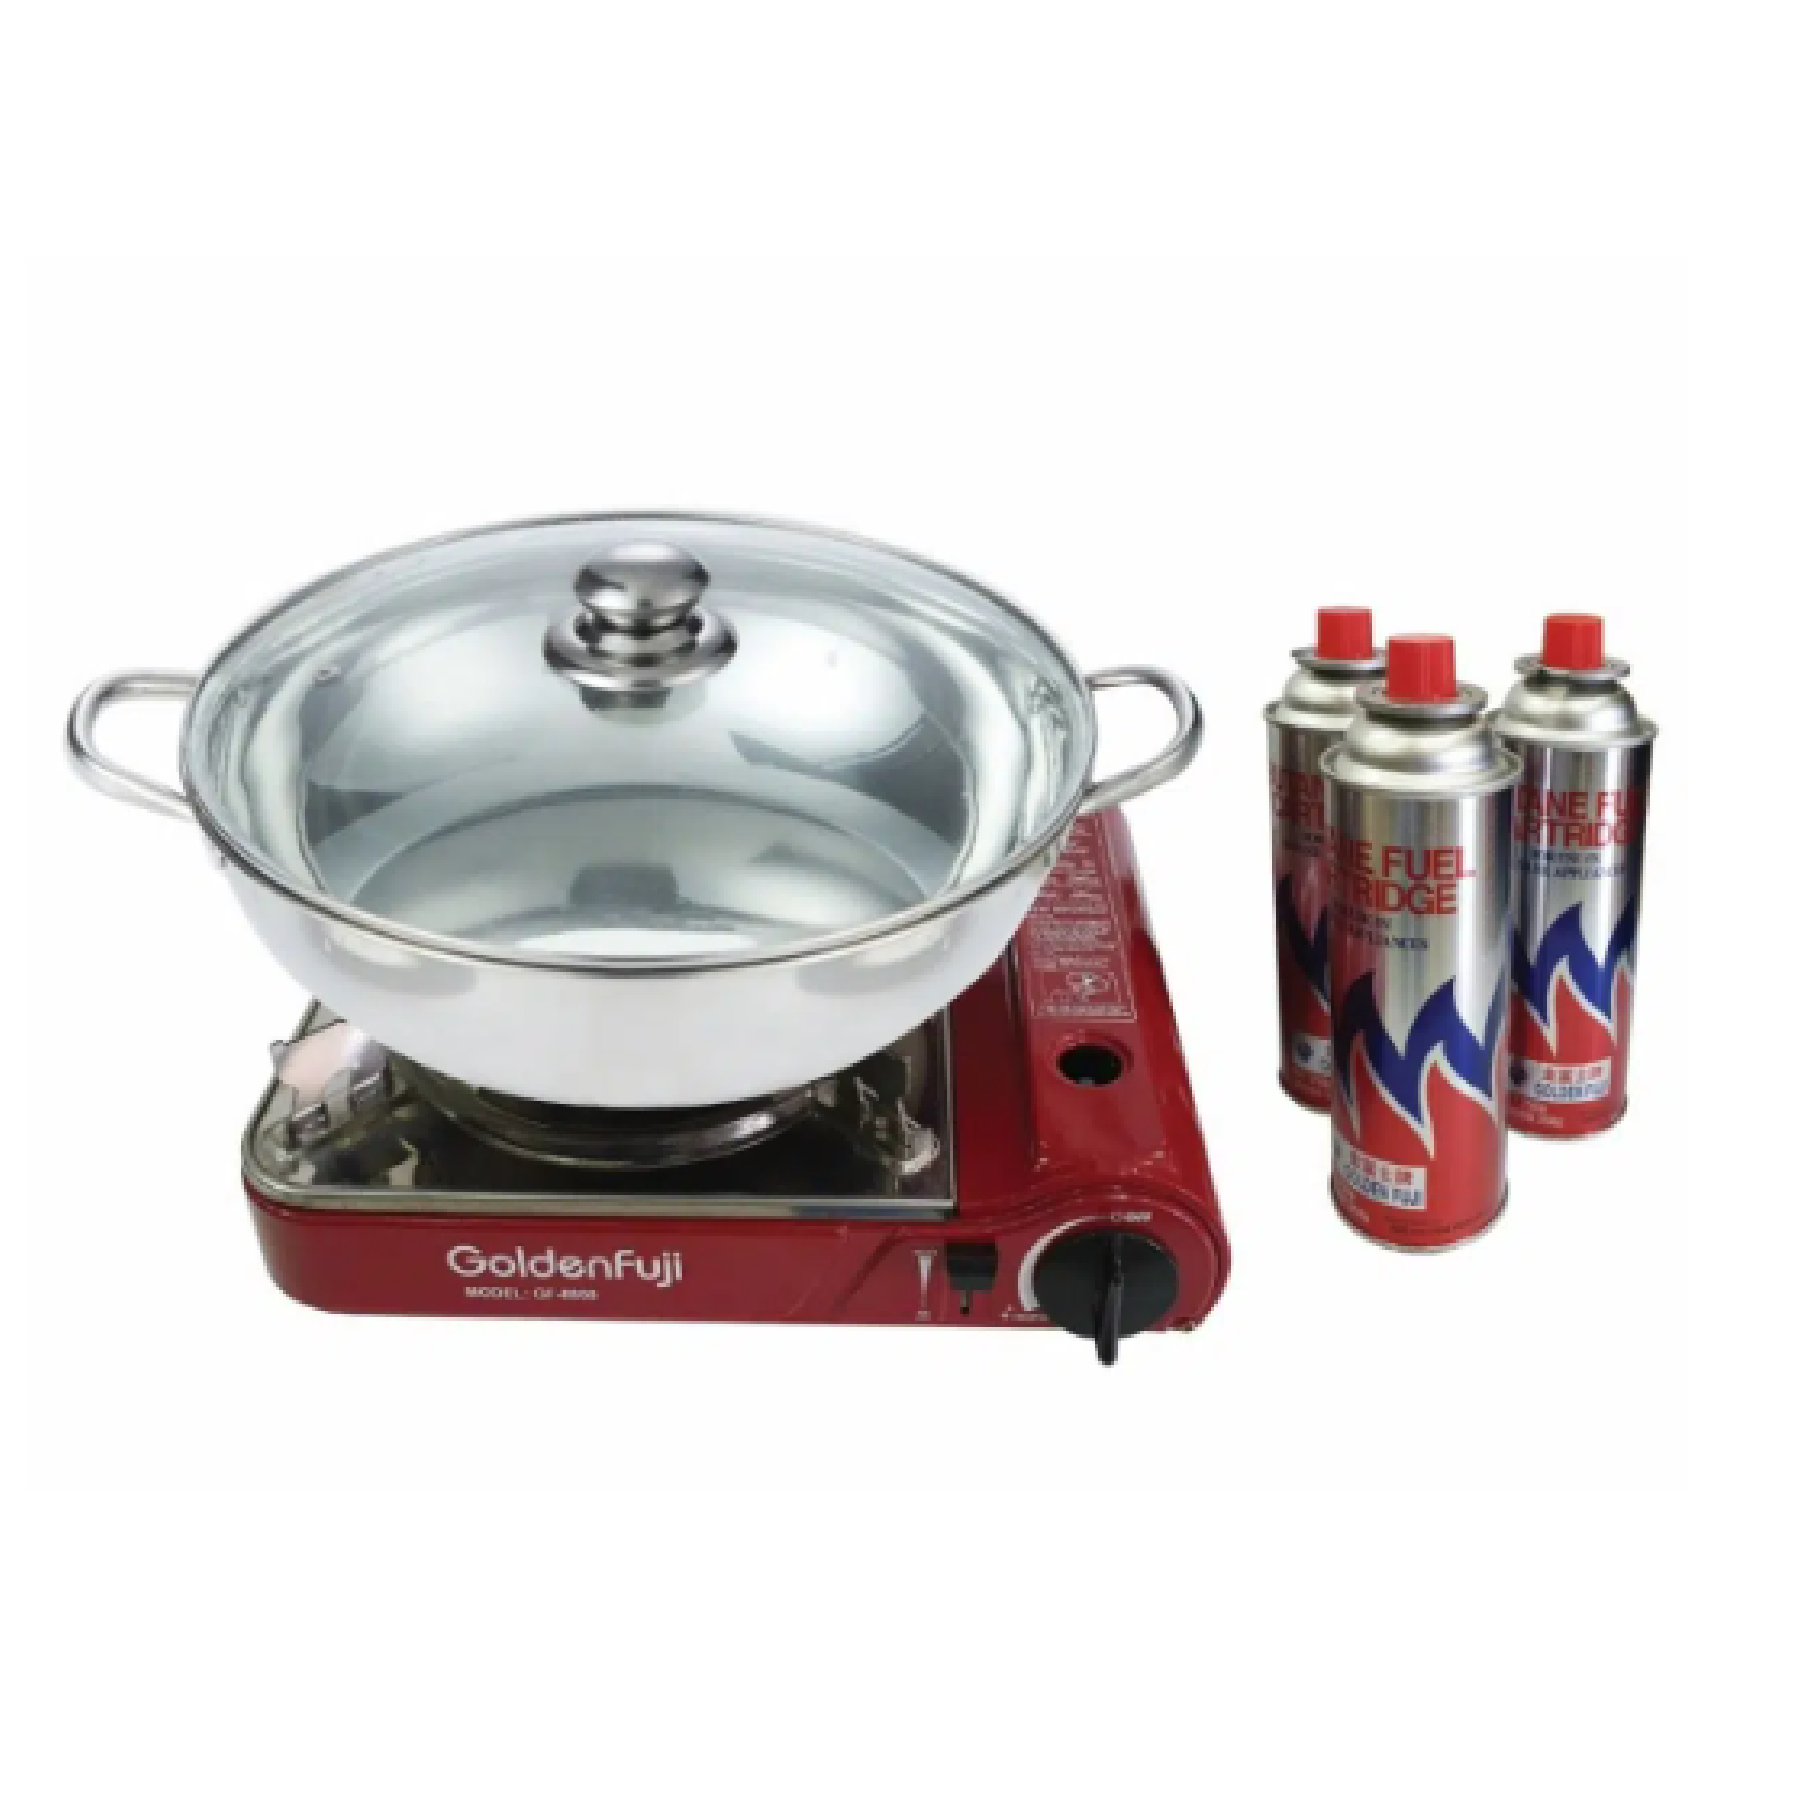 GOLDEN FUJI Portable Steamboat Set Comes With One Normal Pot & 3 Gas Cartridge GF 8800/2